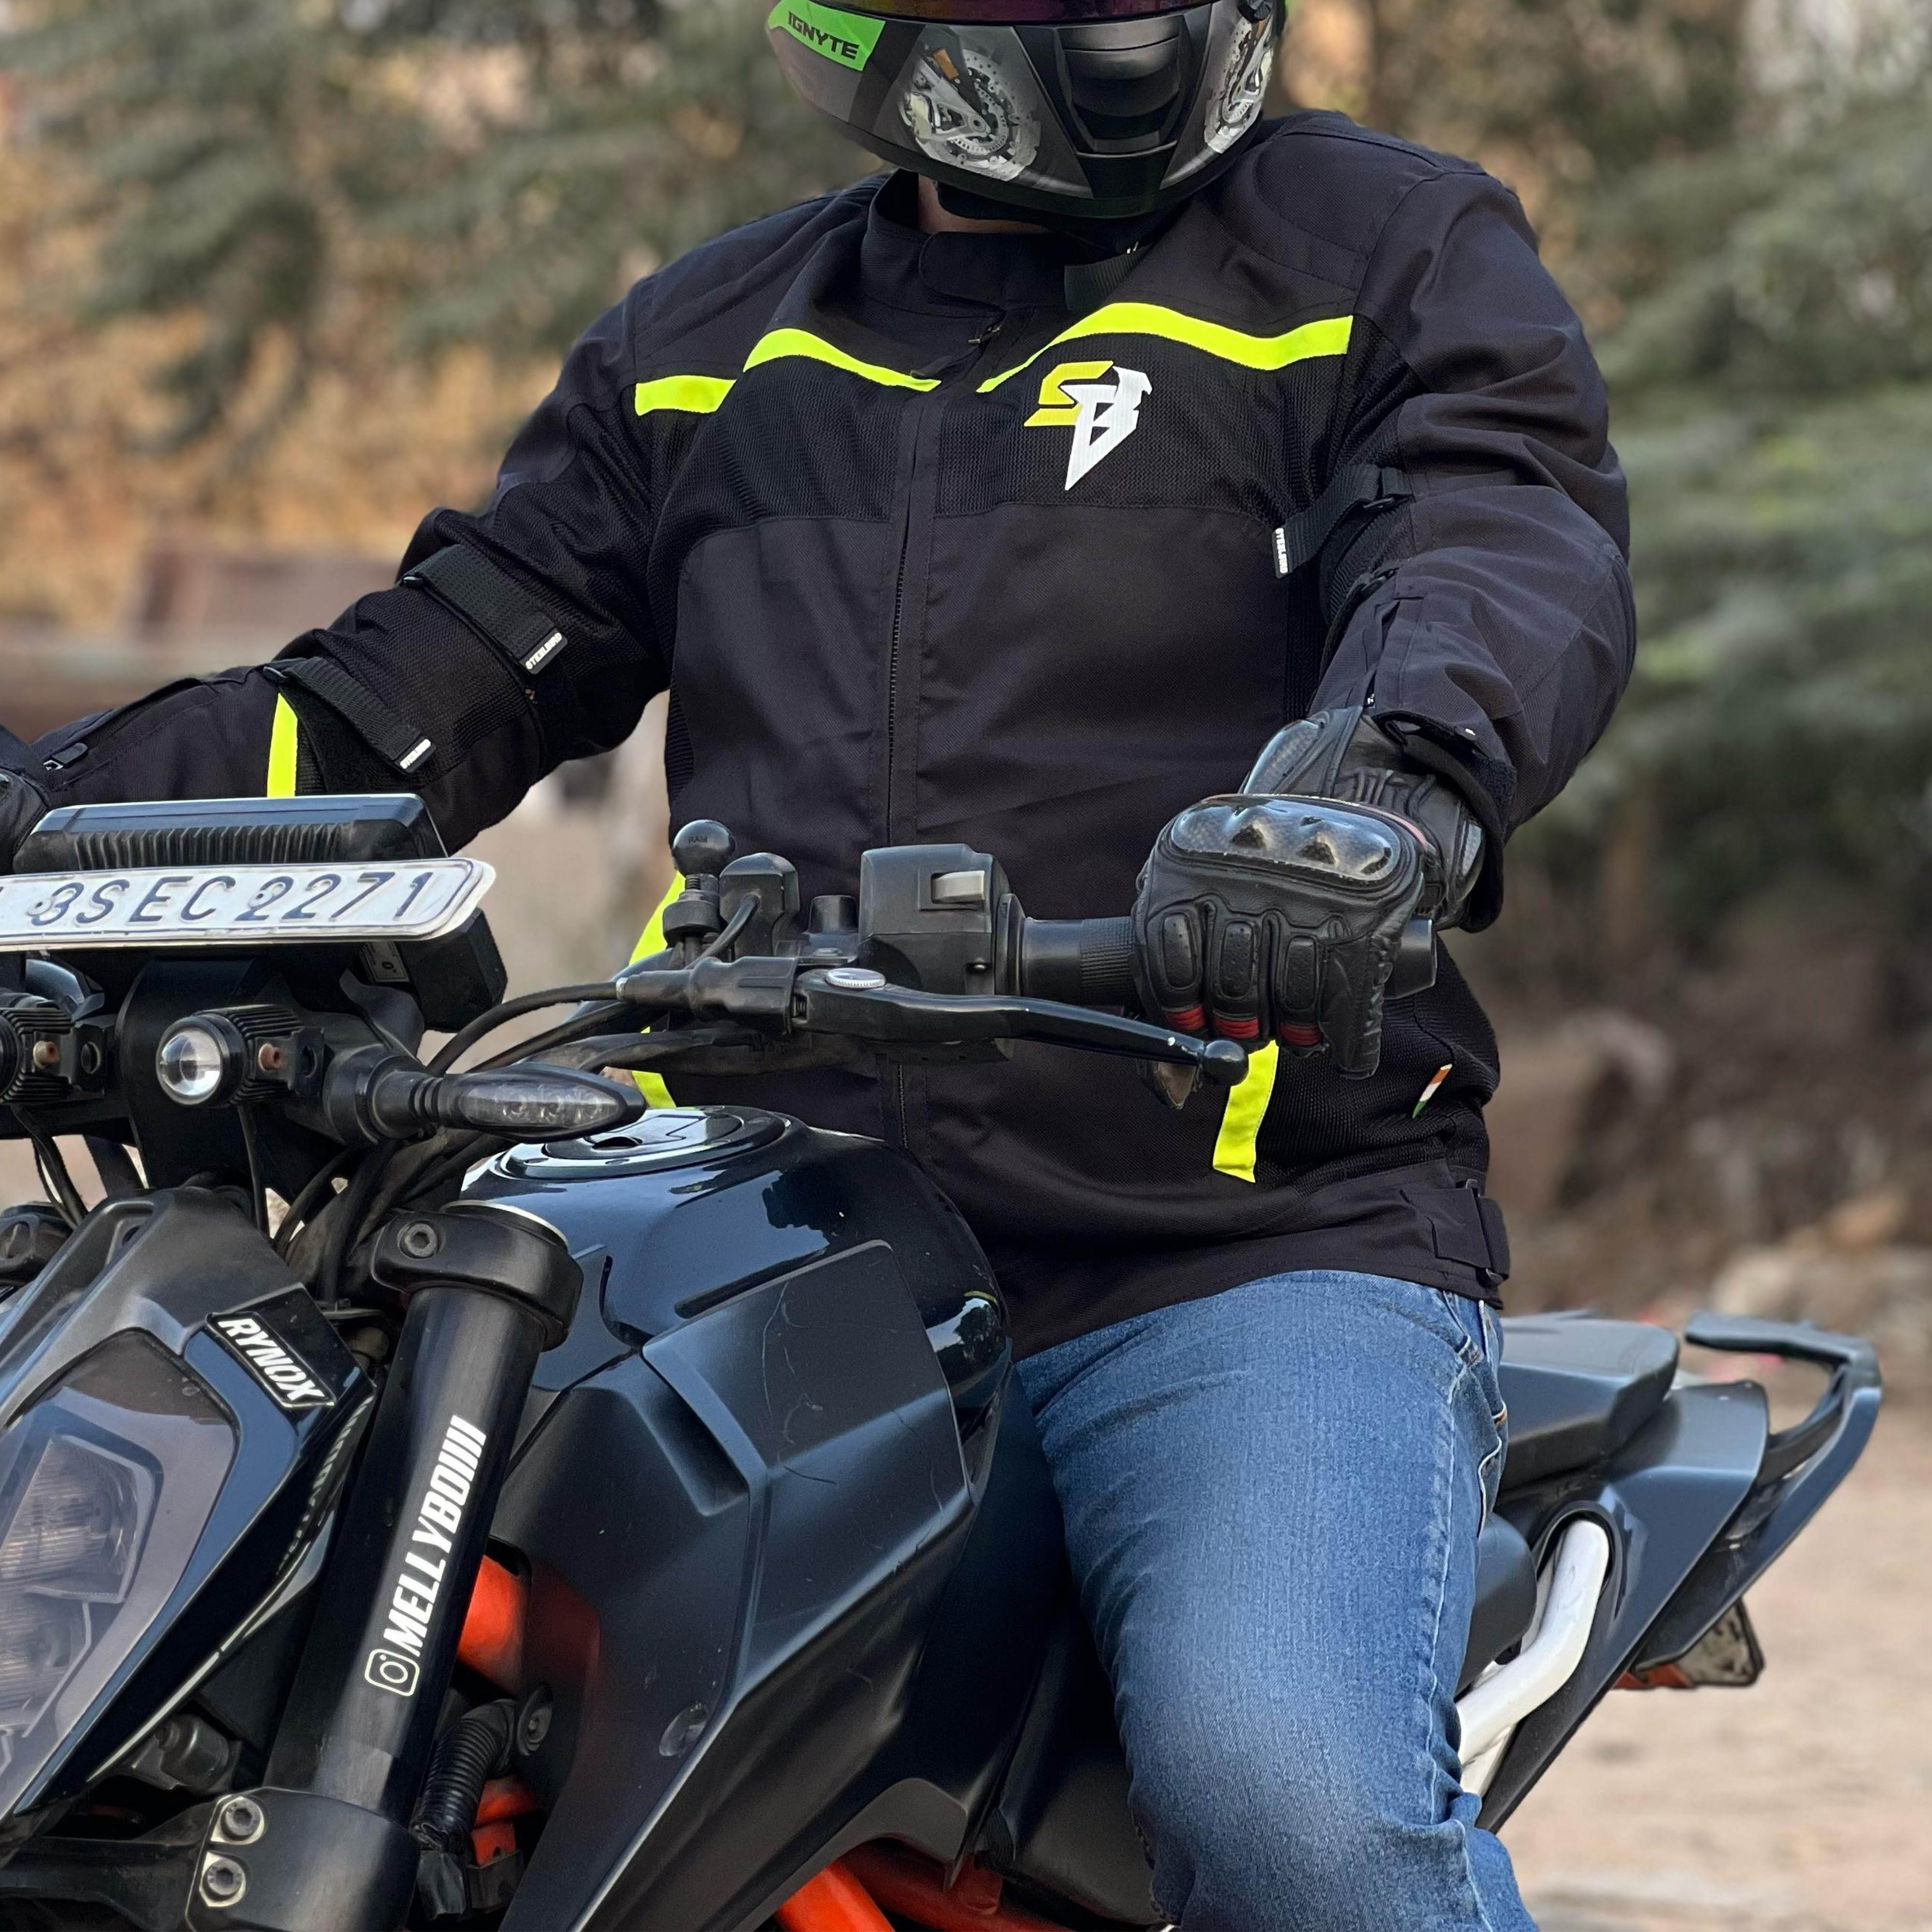 Steelbird Zojila Z2 Riding Jacket With Impact Protection And Abrasion Resistance